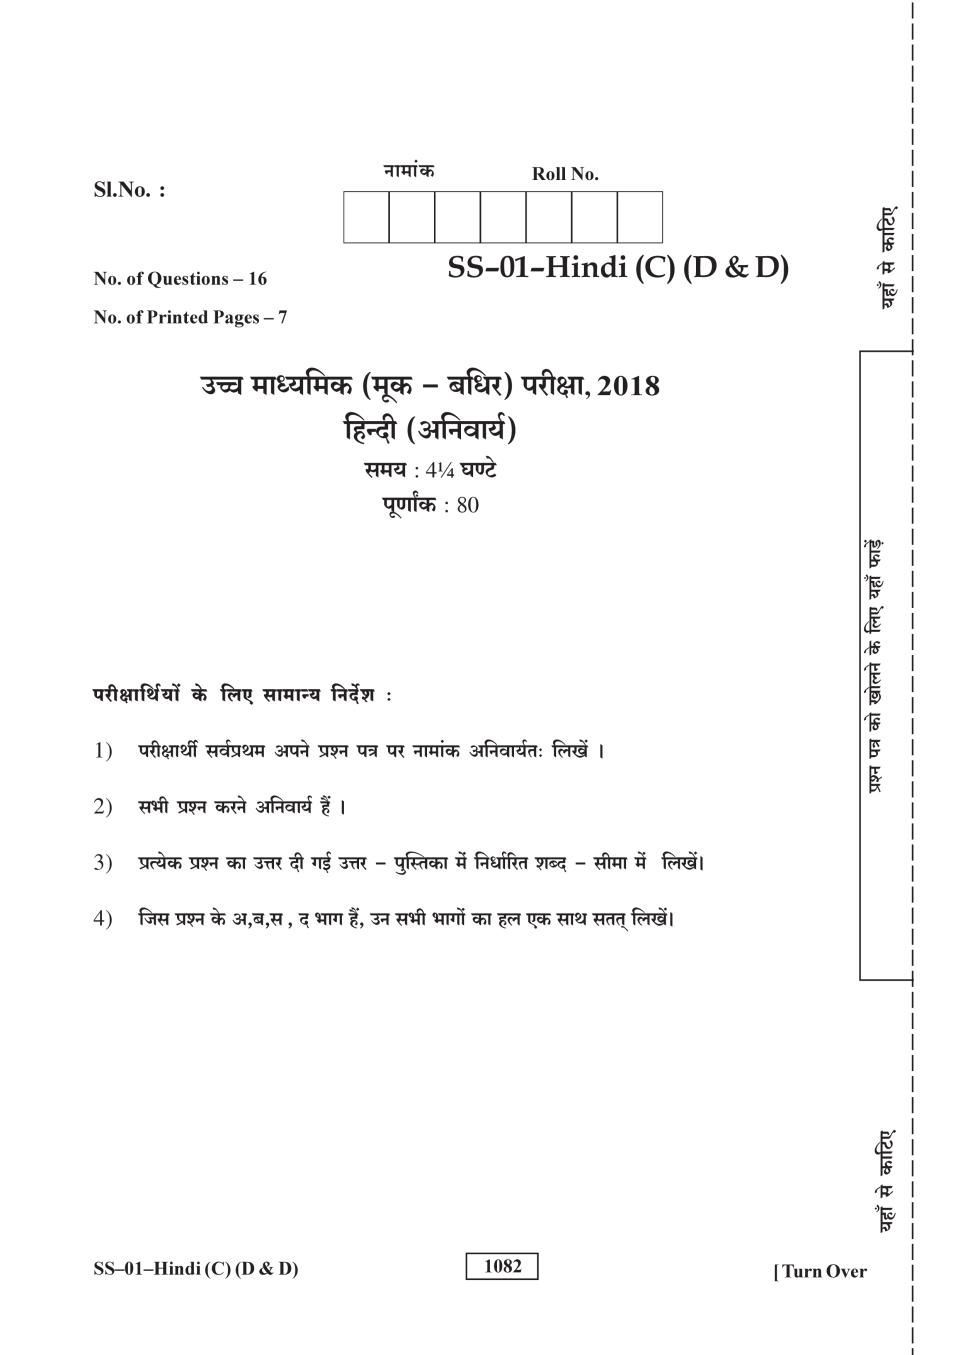 Rajasthan Board 12th Class Hindi (D&D) Question Paper 2018 - Page 1